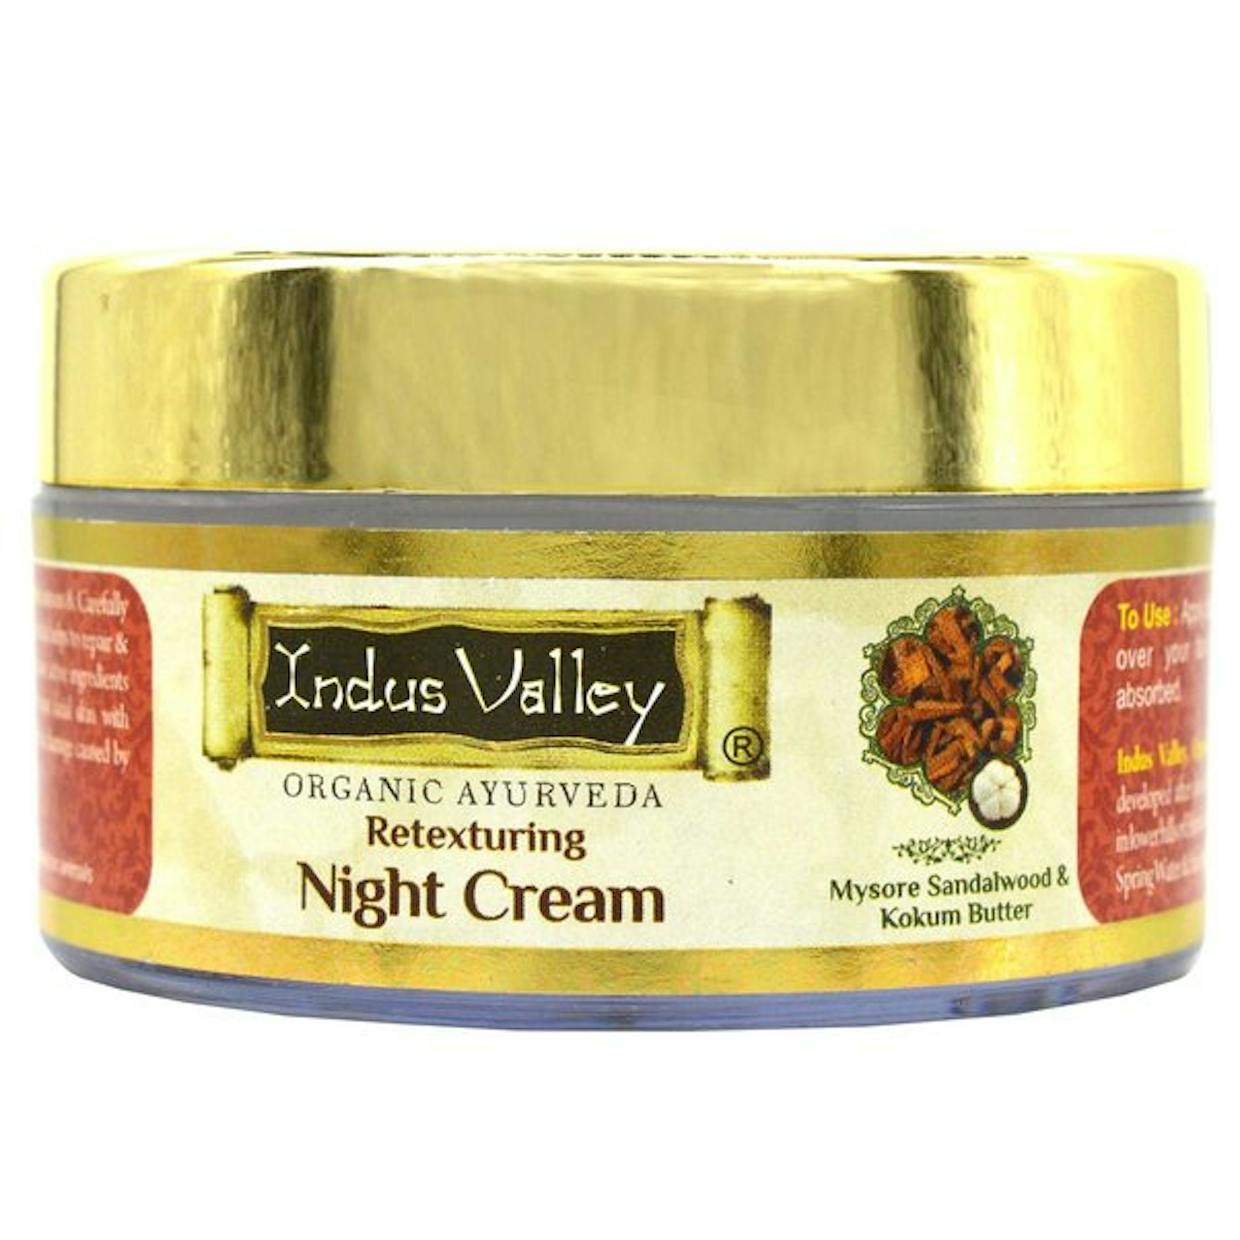 What type of skin cream can we apply at night?